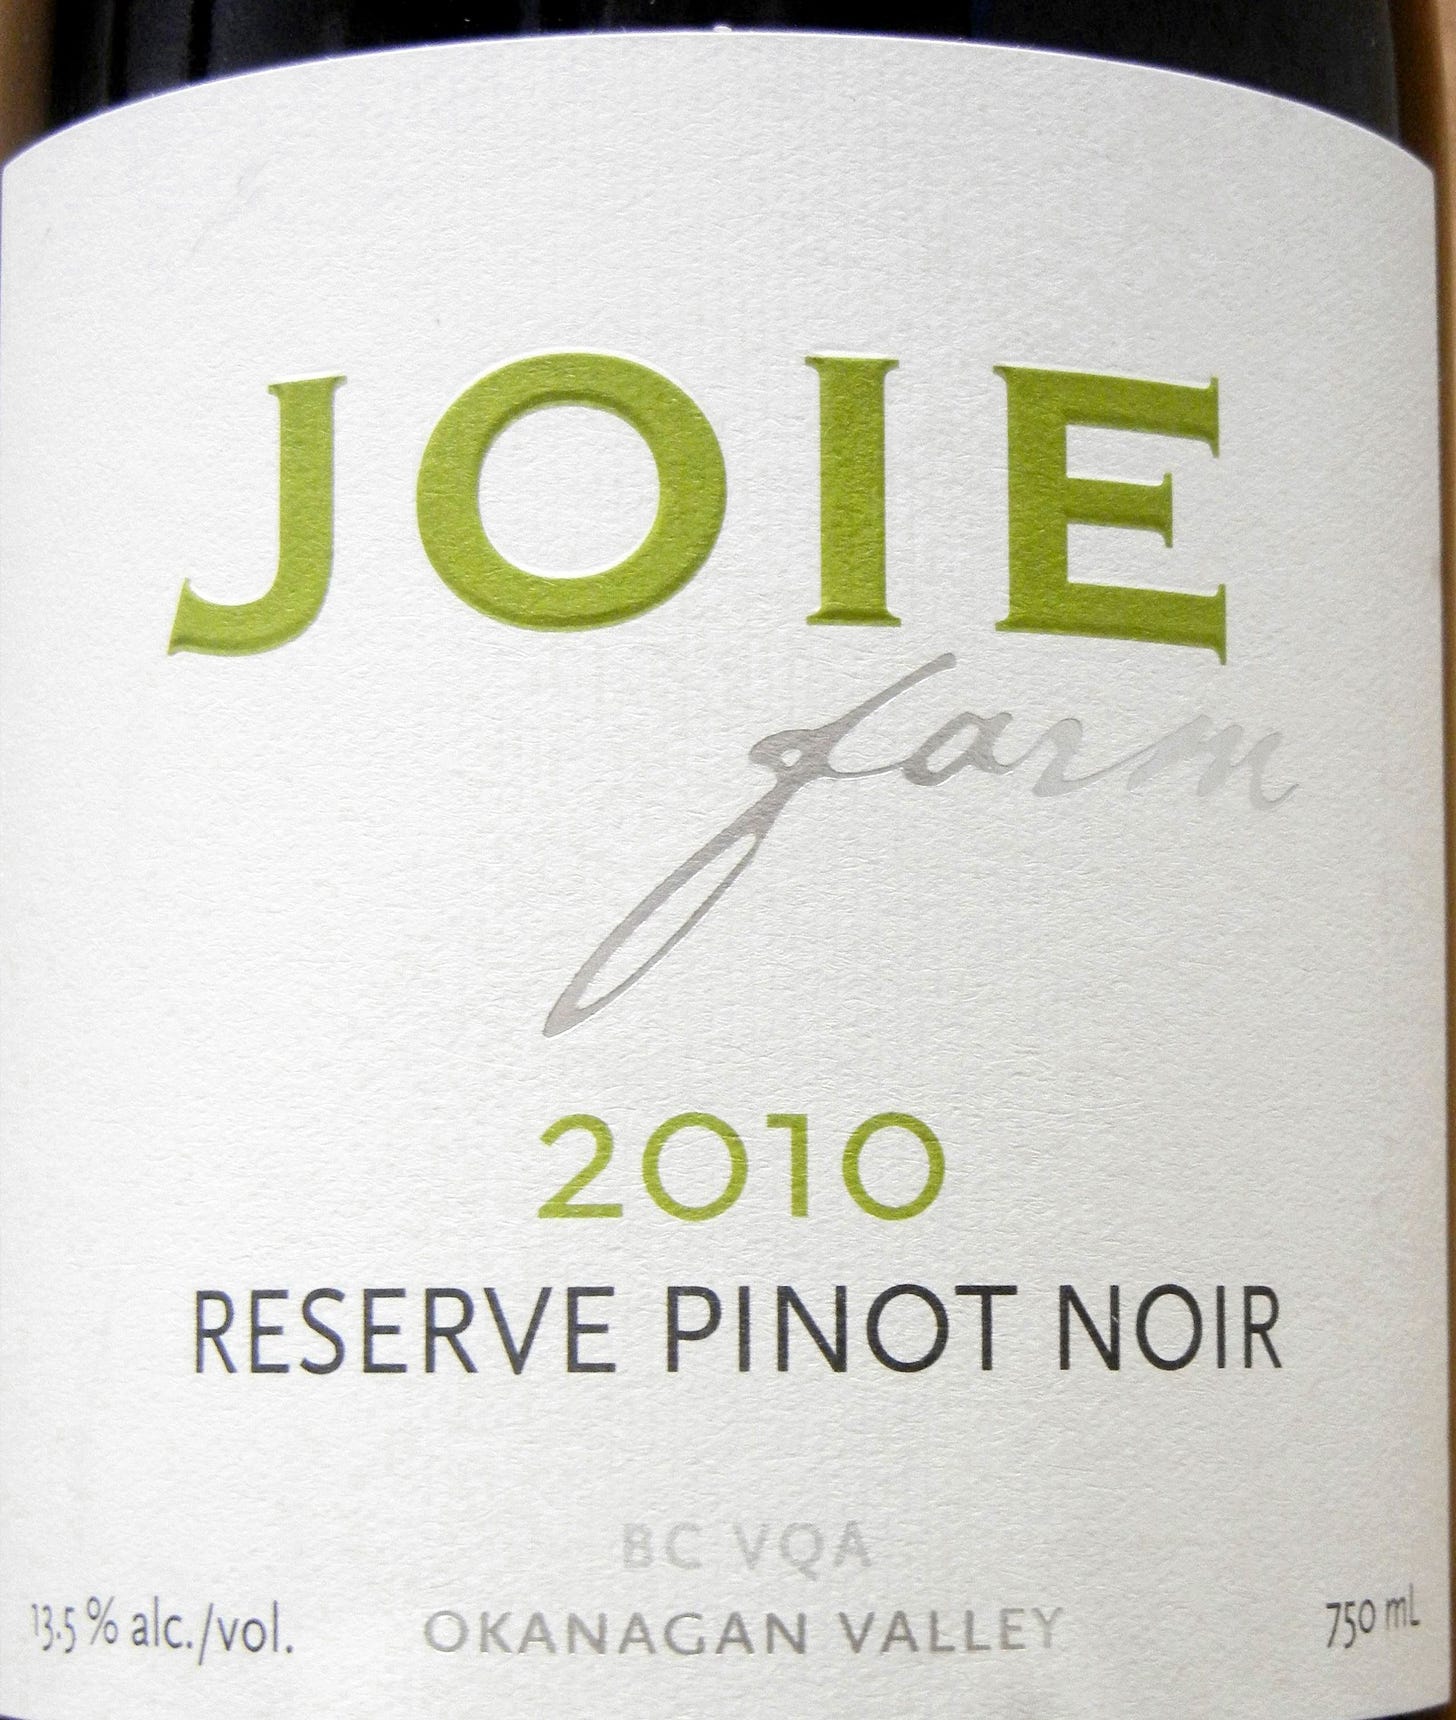 Joie Reserve Pinot Noir 2010 Label - BC Pinot Noir Tasting Review 10